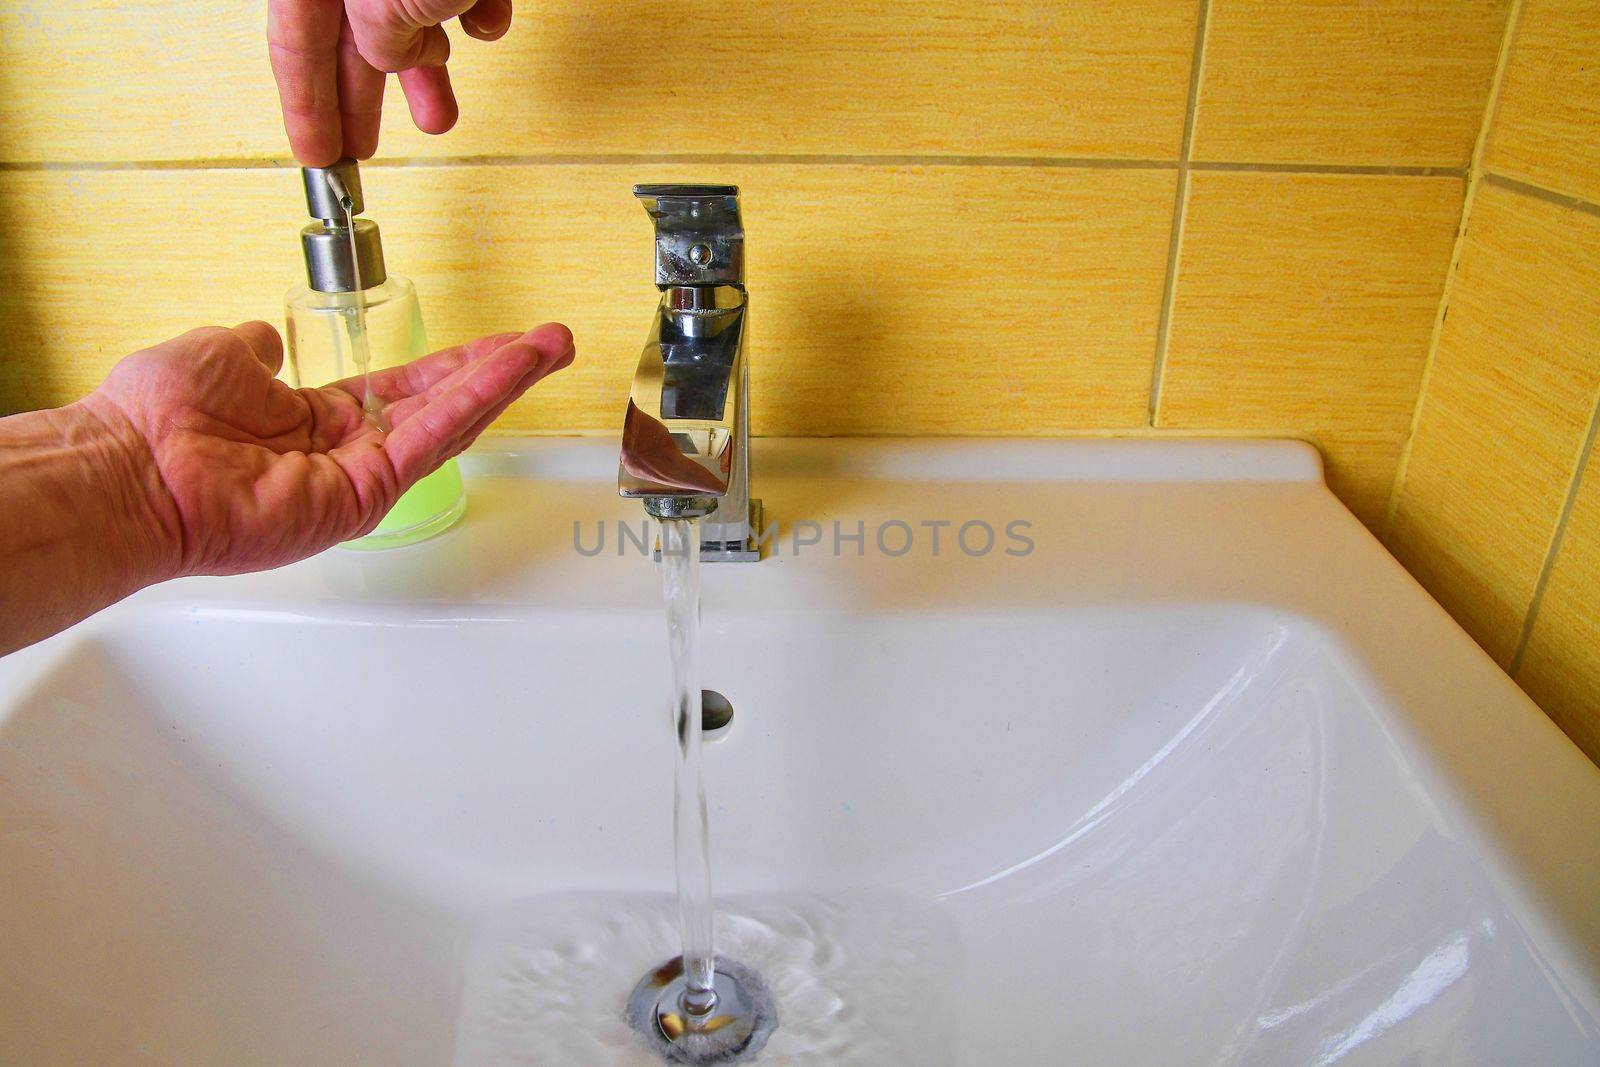 Closeup of a caucasian man washing his hands with soap in the sink of a bathroom. Prevention of spreading coronavirus. Covid 19